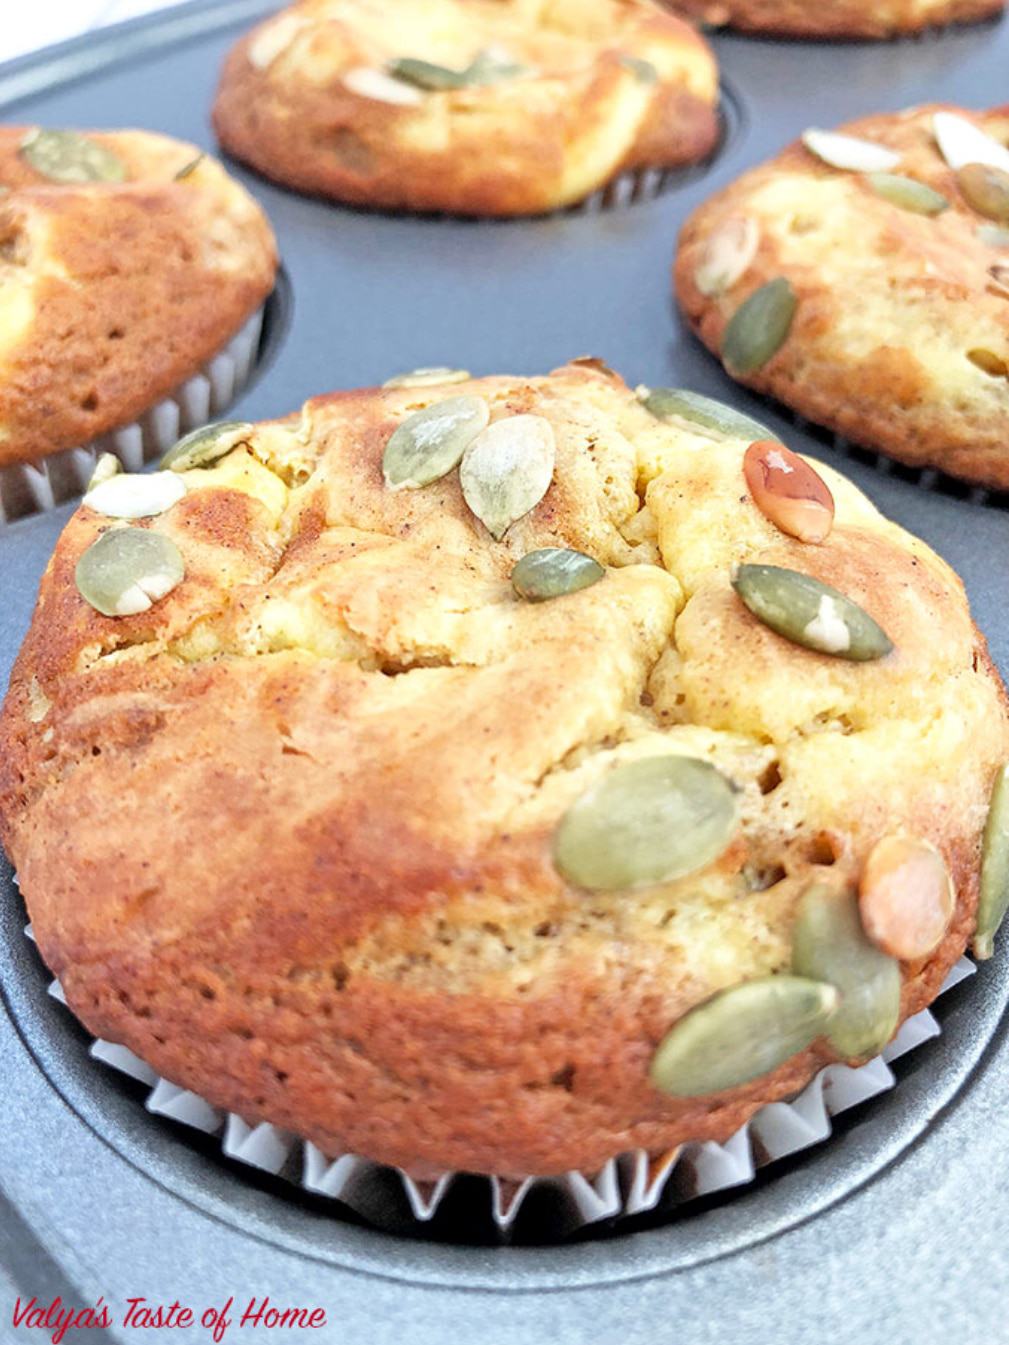 These Pumpkin Cheesecake Muffins are a must-bake fall treat! They are super moist, pillowy soft, fluffy, swirled with cheesecake batter, topped with pumpkin seeds and a burst of the fall flavor. #pumpkincheesecakemuffins #homemade #softandmoist #cheesecakemuffins #valyastasteofhome